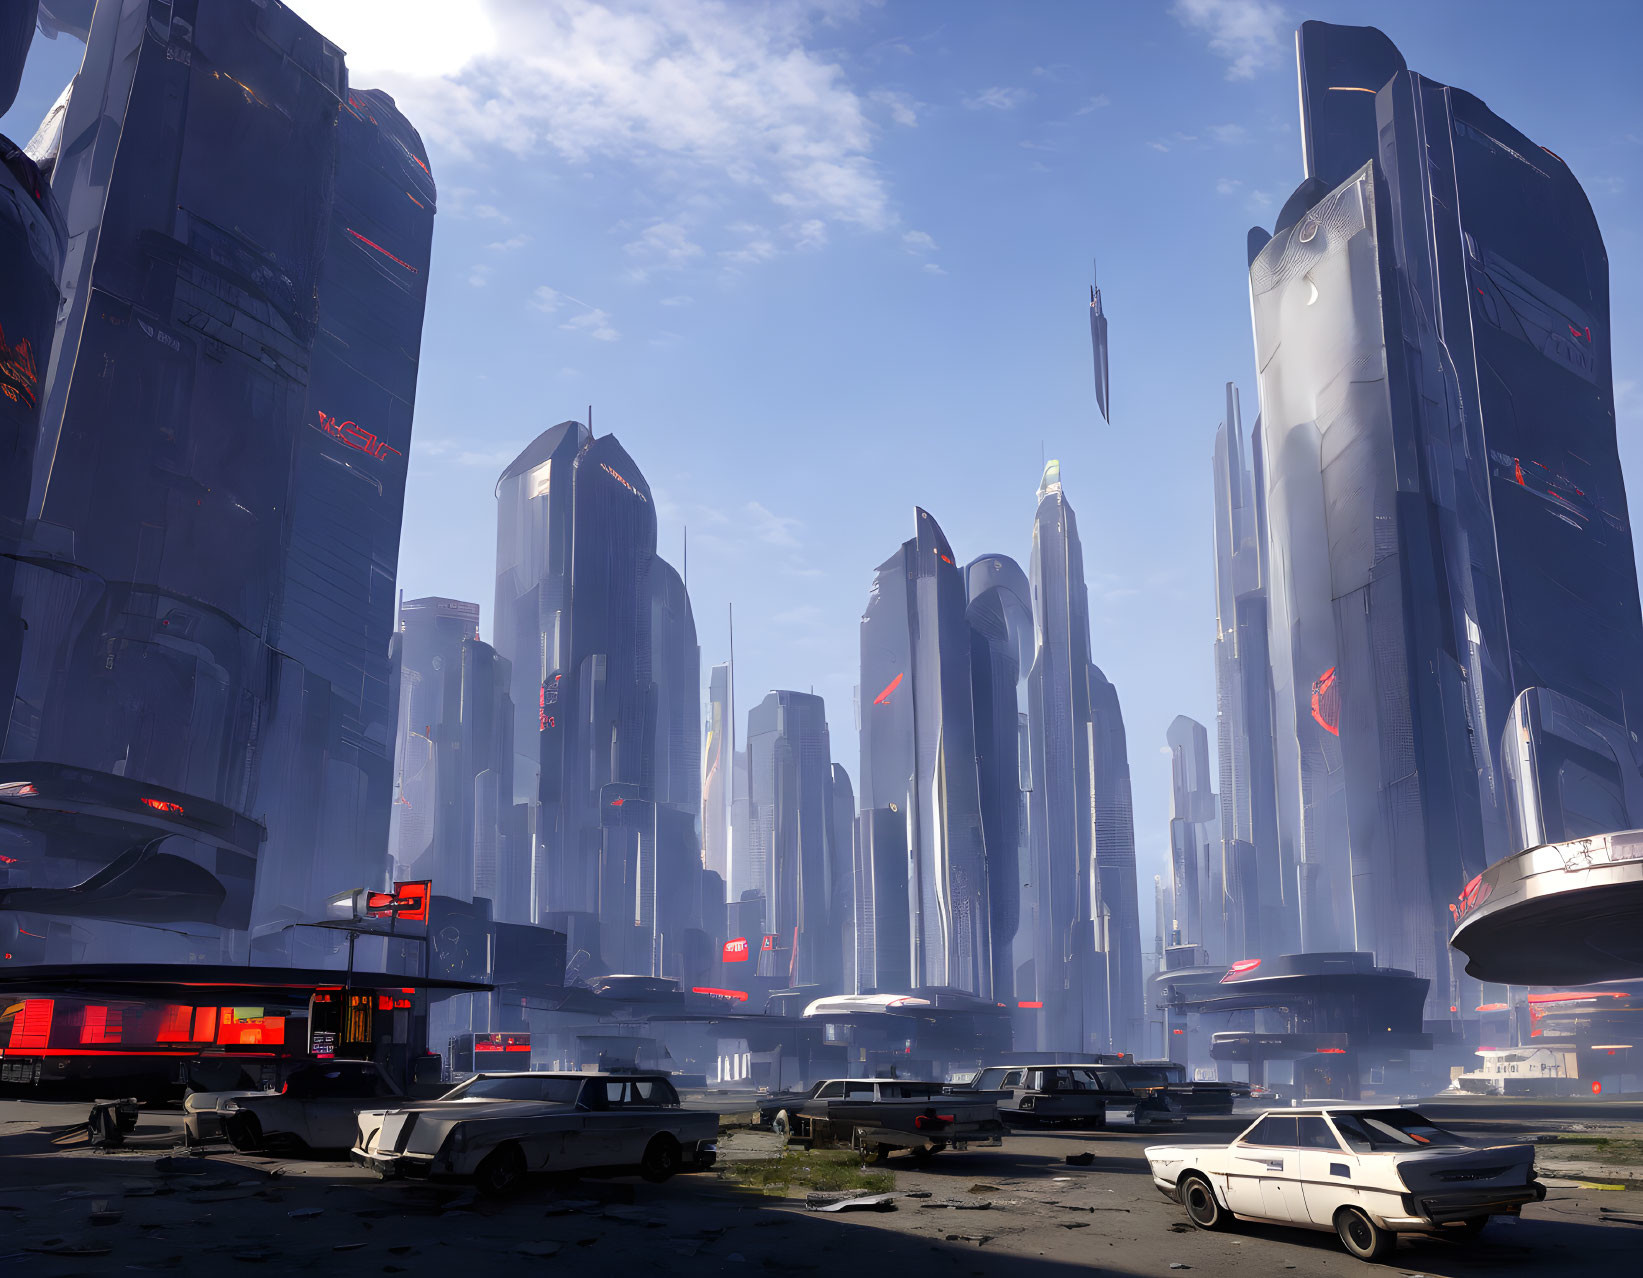 Futuristic cityscape with skyscrapers, neon lights, flying vehicles, and retro-fut